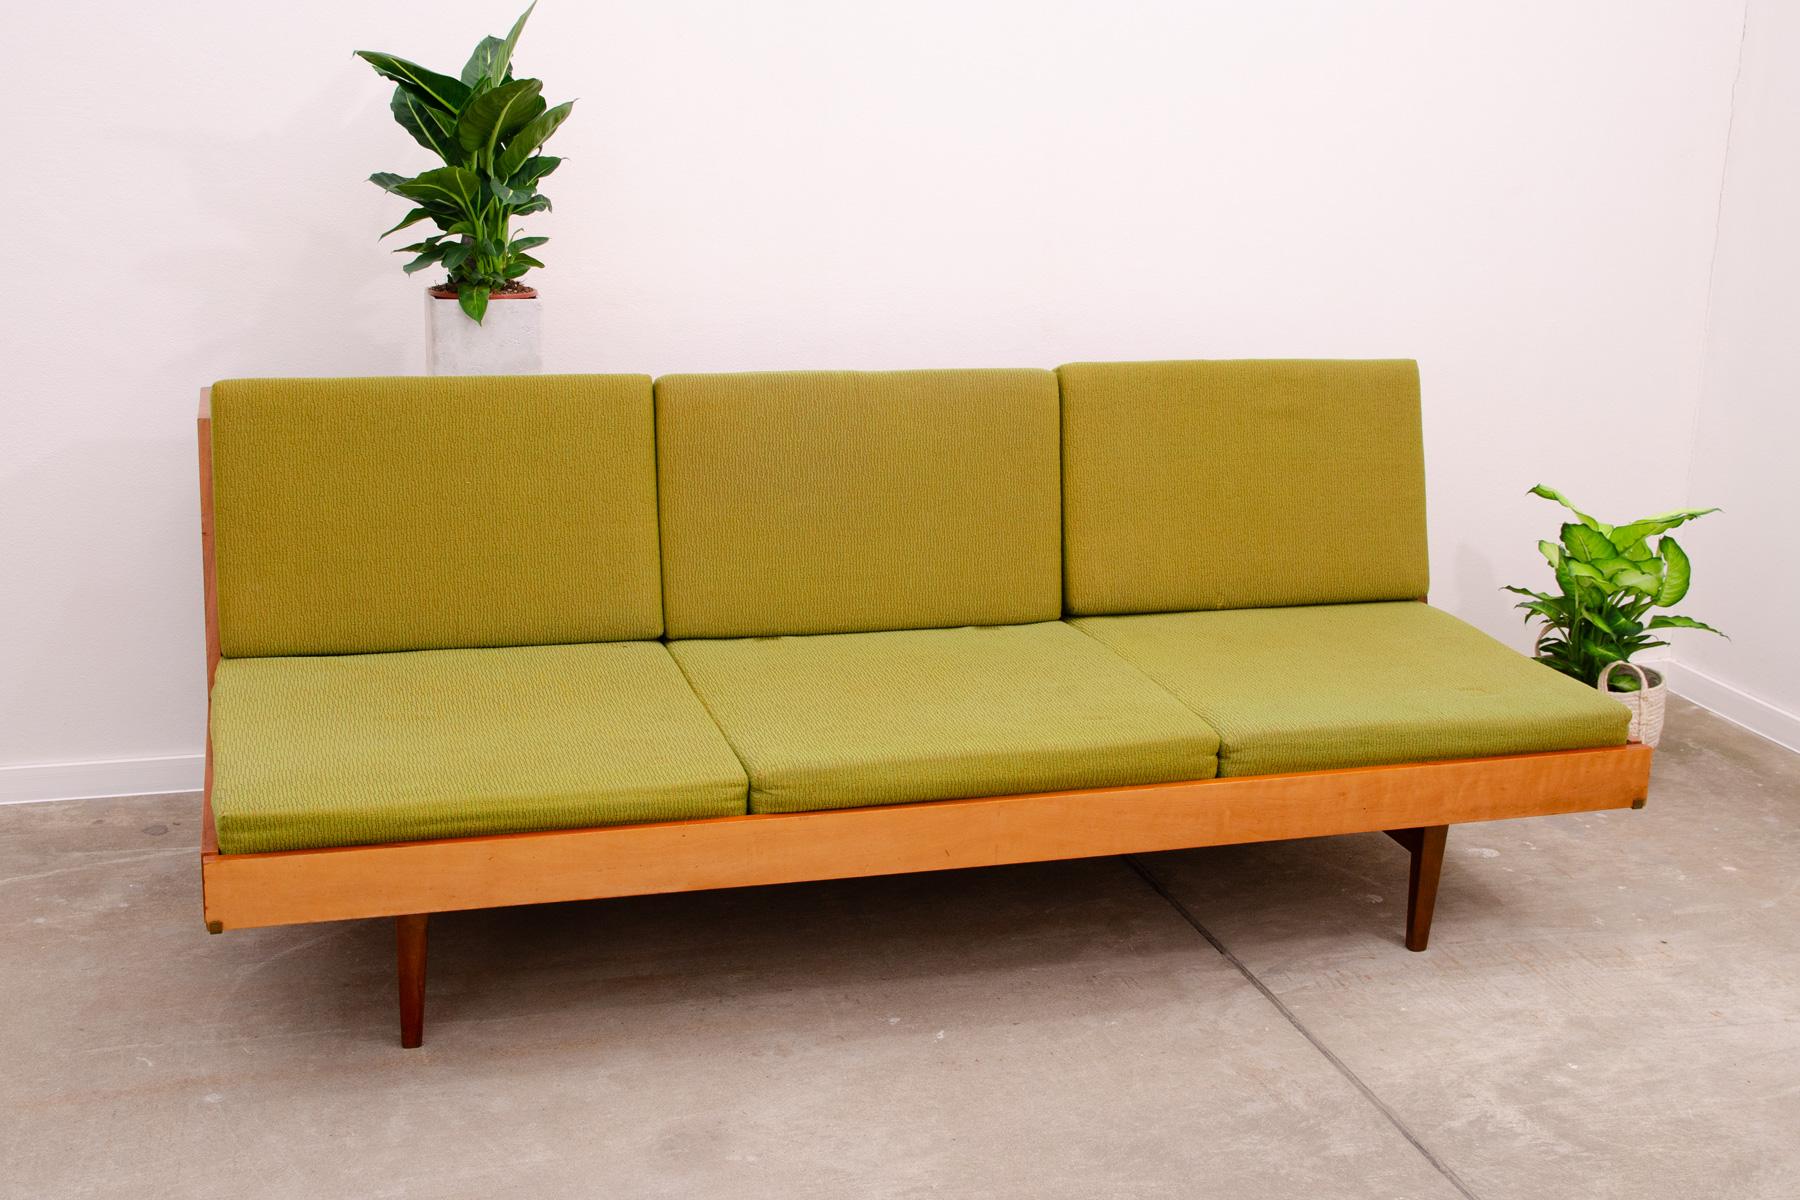 Midcentury sofa bed, made by Jitona company in the former Czechoslovakia in the 1970s. The sofa is made of walnut wood and has an original upholstery. The sofa is in a well-preserved and good condition, however, it bears reasonable signs of age and